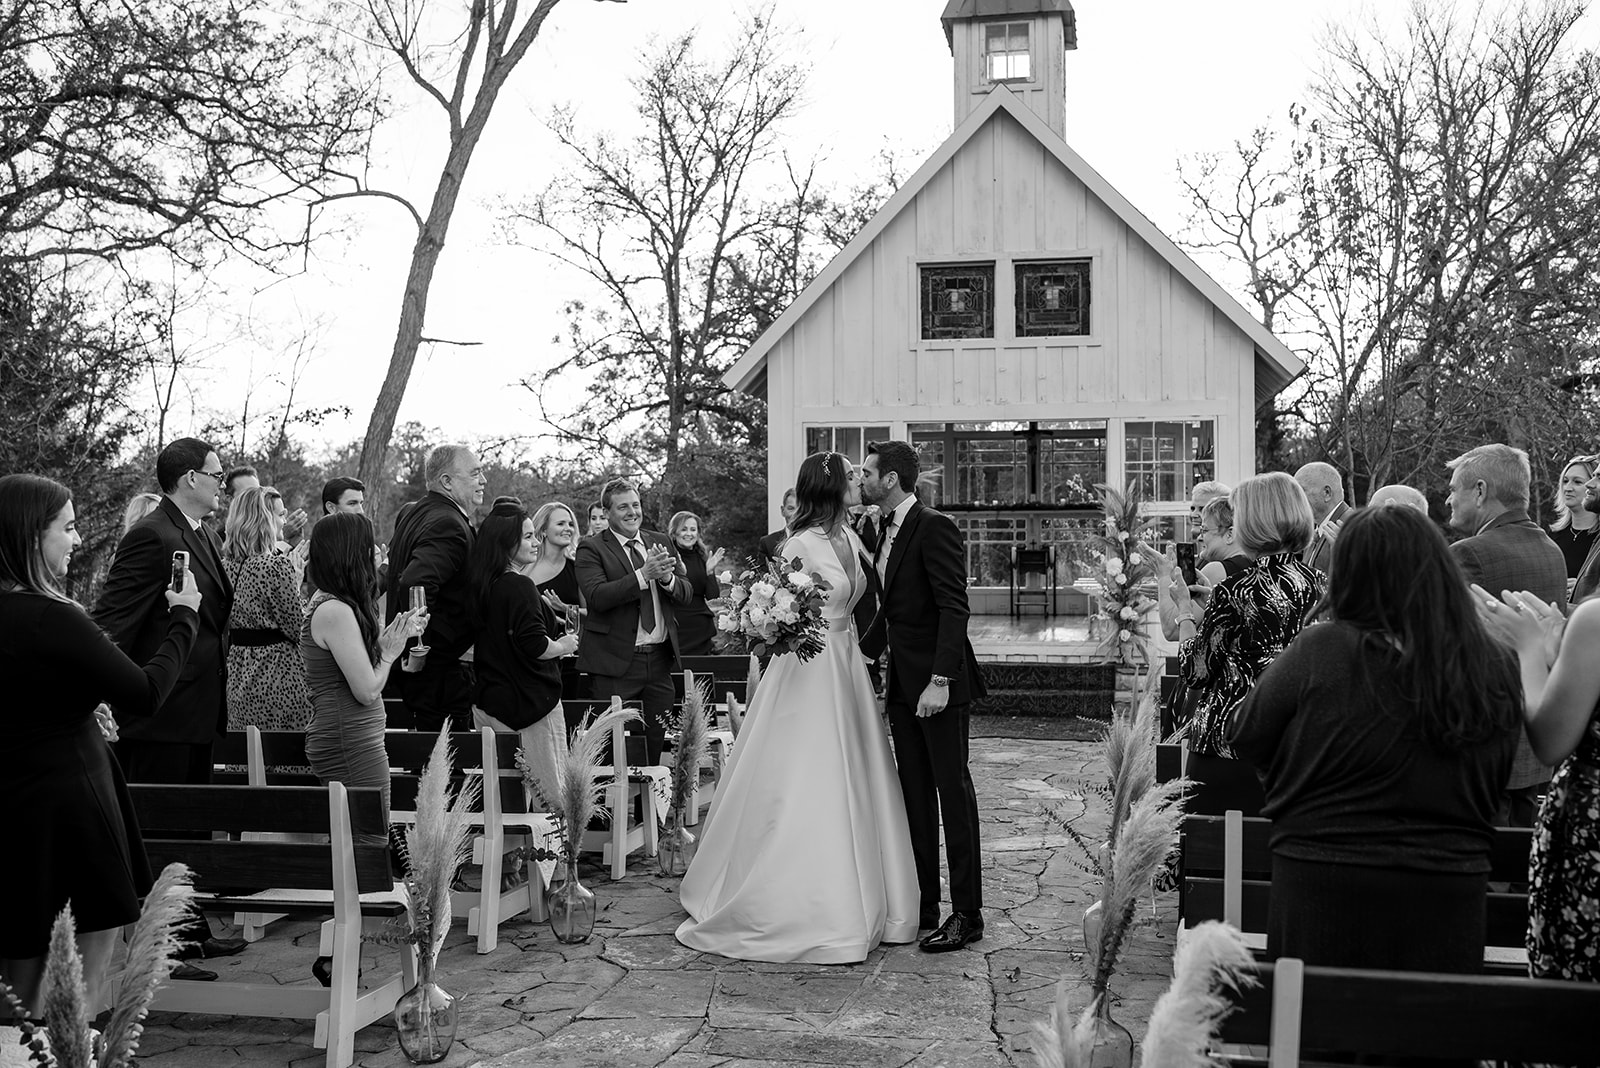 The bride and groom kiss while walking down the aisle of their intimate alfresco winter wedding at 7F Lodge in Aggieland.